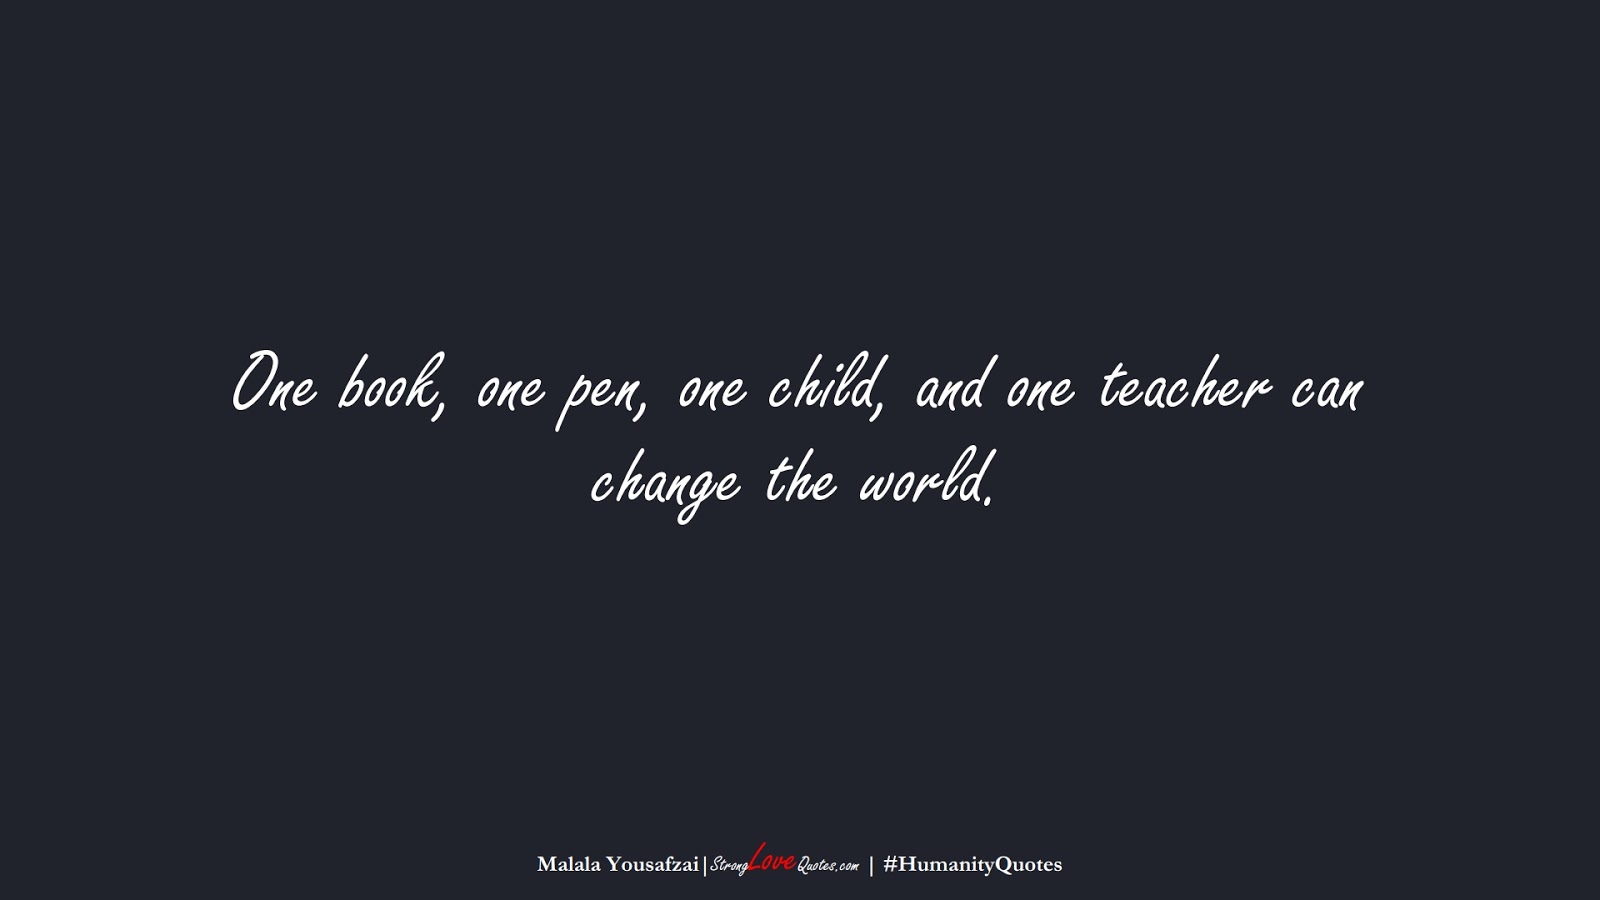 One book, one pen, one child, and one teacher can change the world. (Malala Yousafzai);  #HumanityQuotes